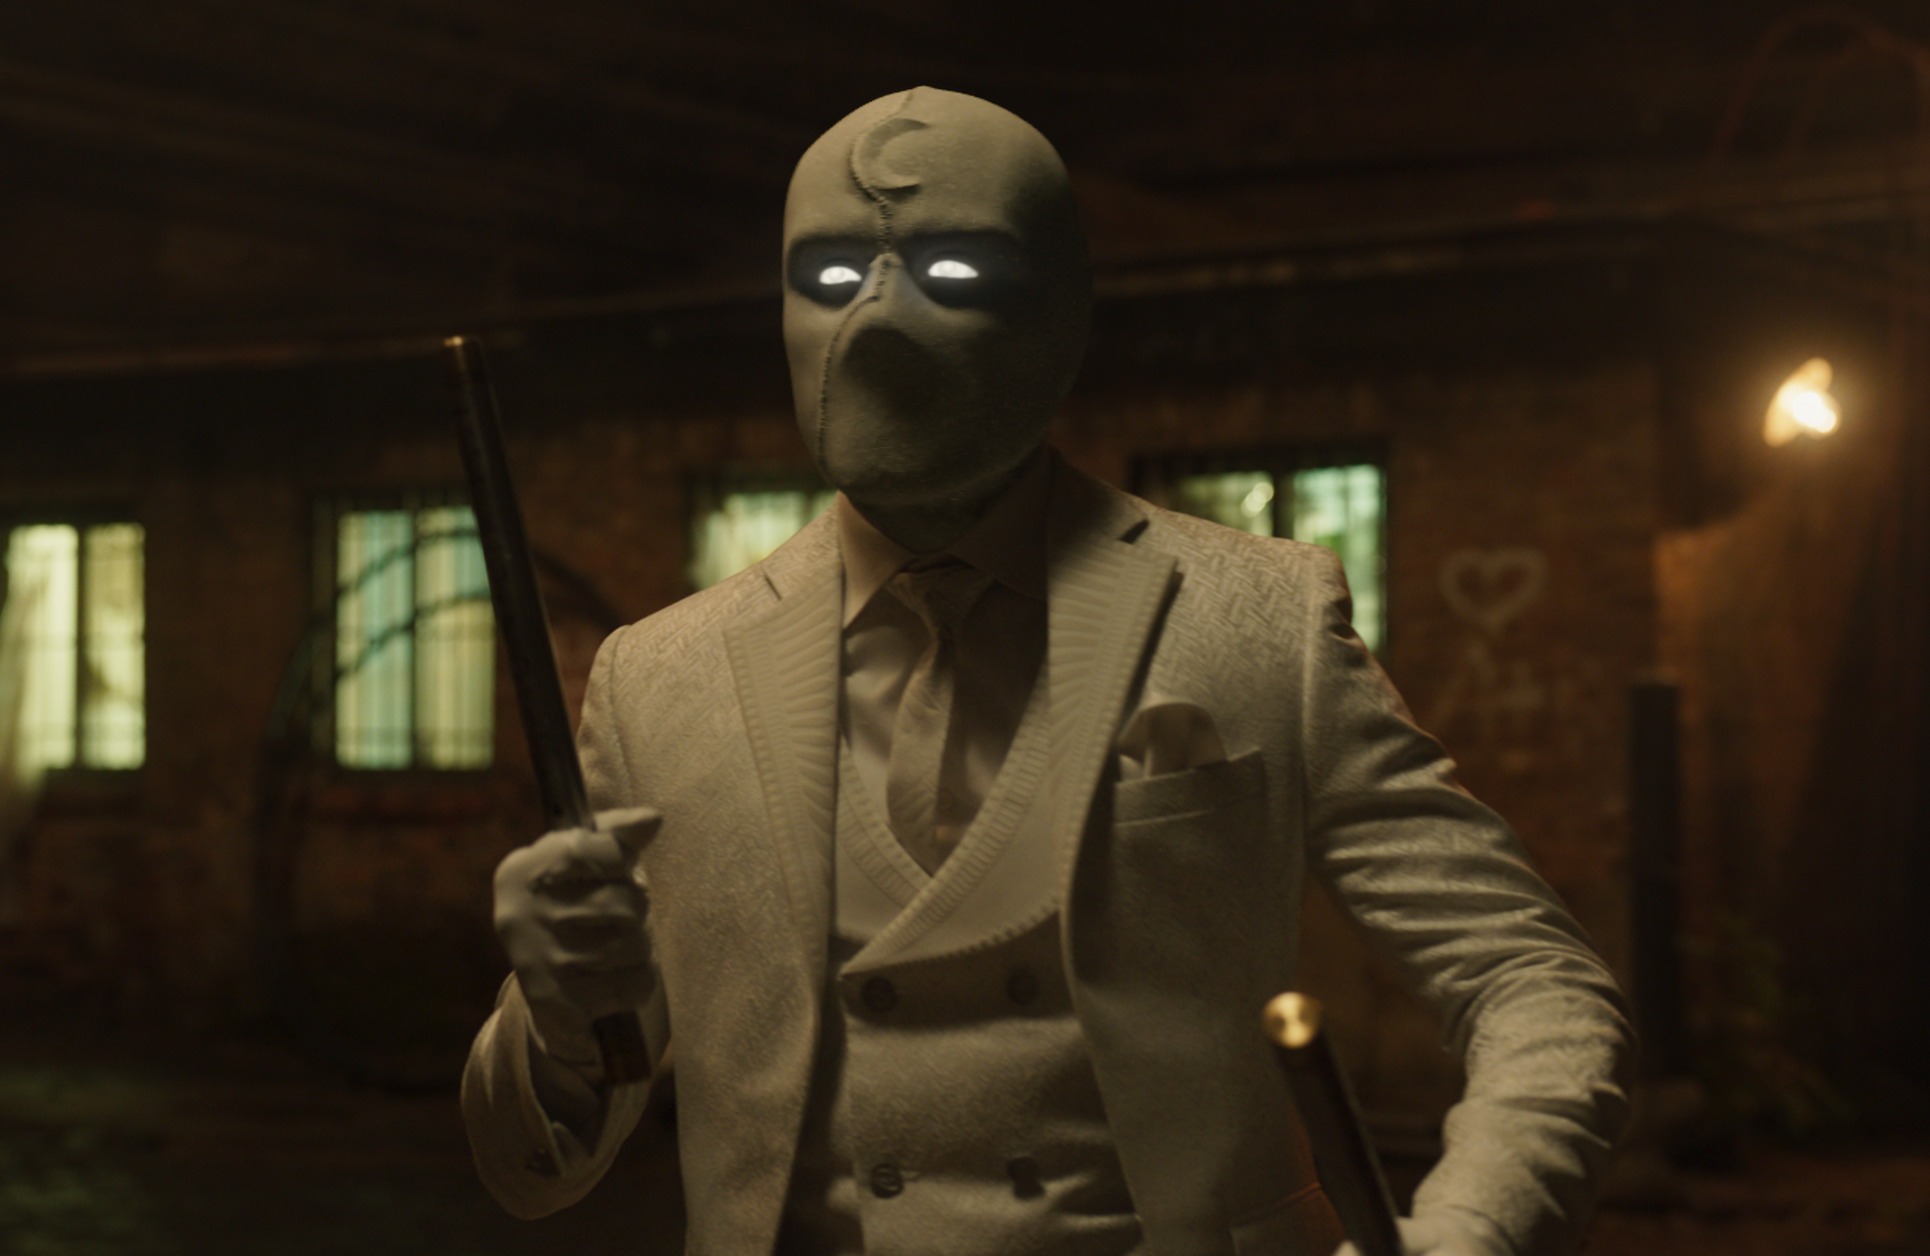 Oscar Isaac in an episode of Marvel's 'Moon Knight.' He's wearing the character's costume, which includes a mask with a sickle moon on it, suit, and cane.